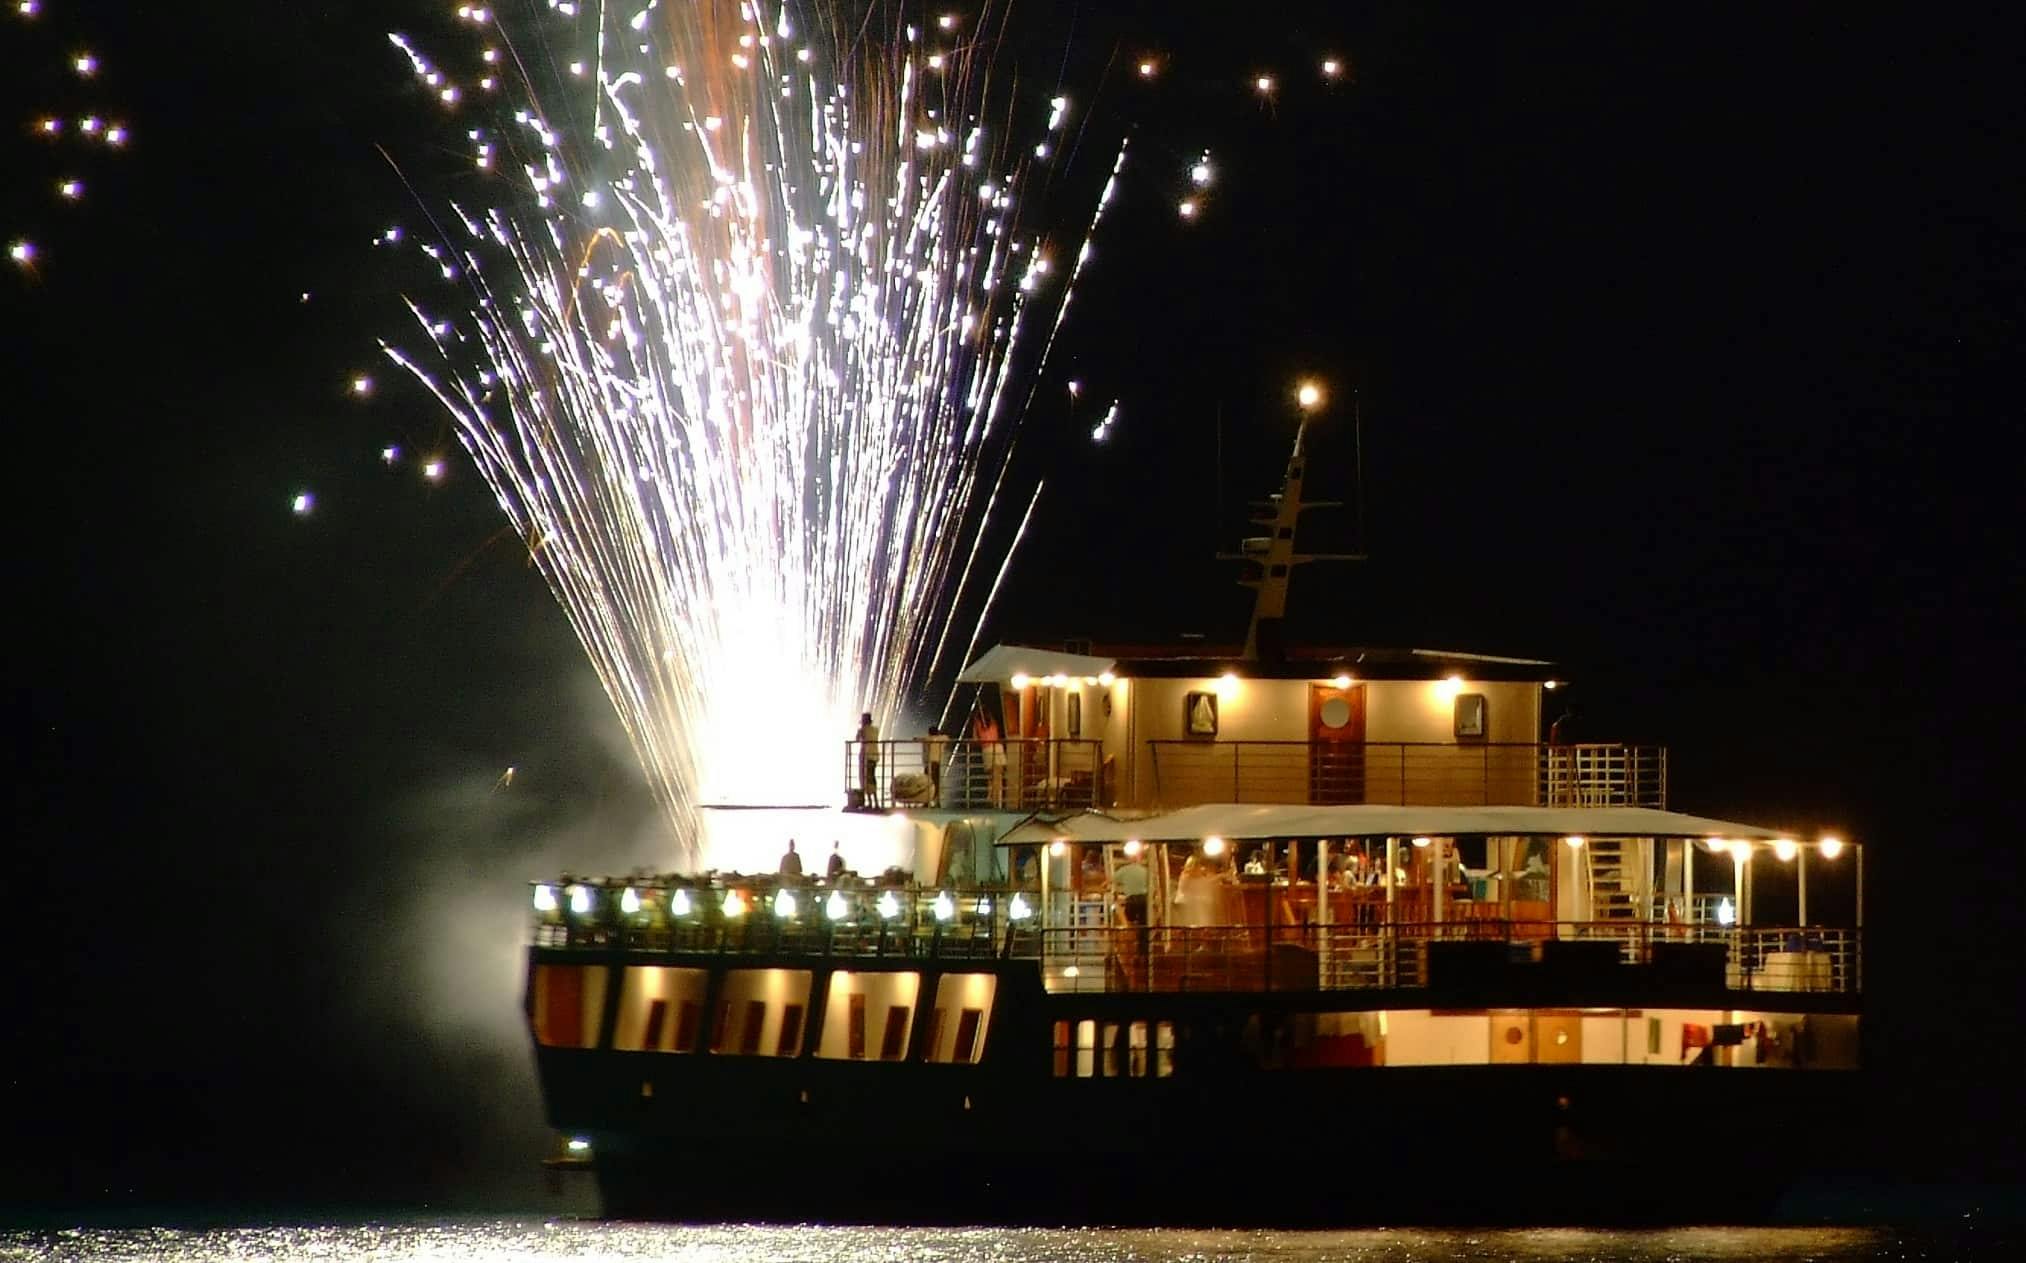 Paphos Dinner and Fireworks Cruise Ticket